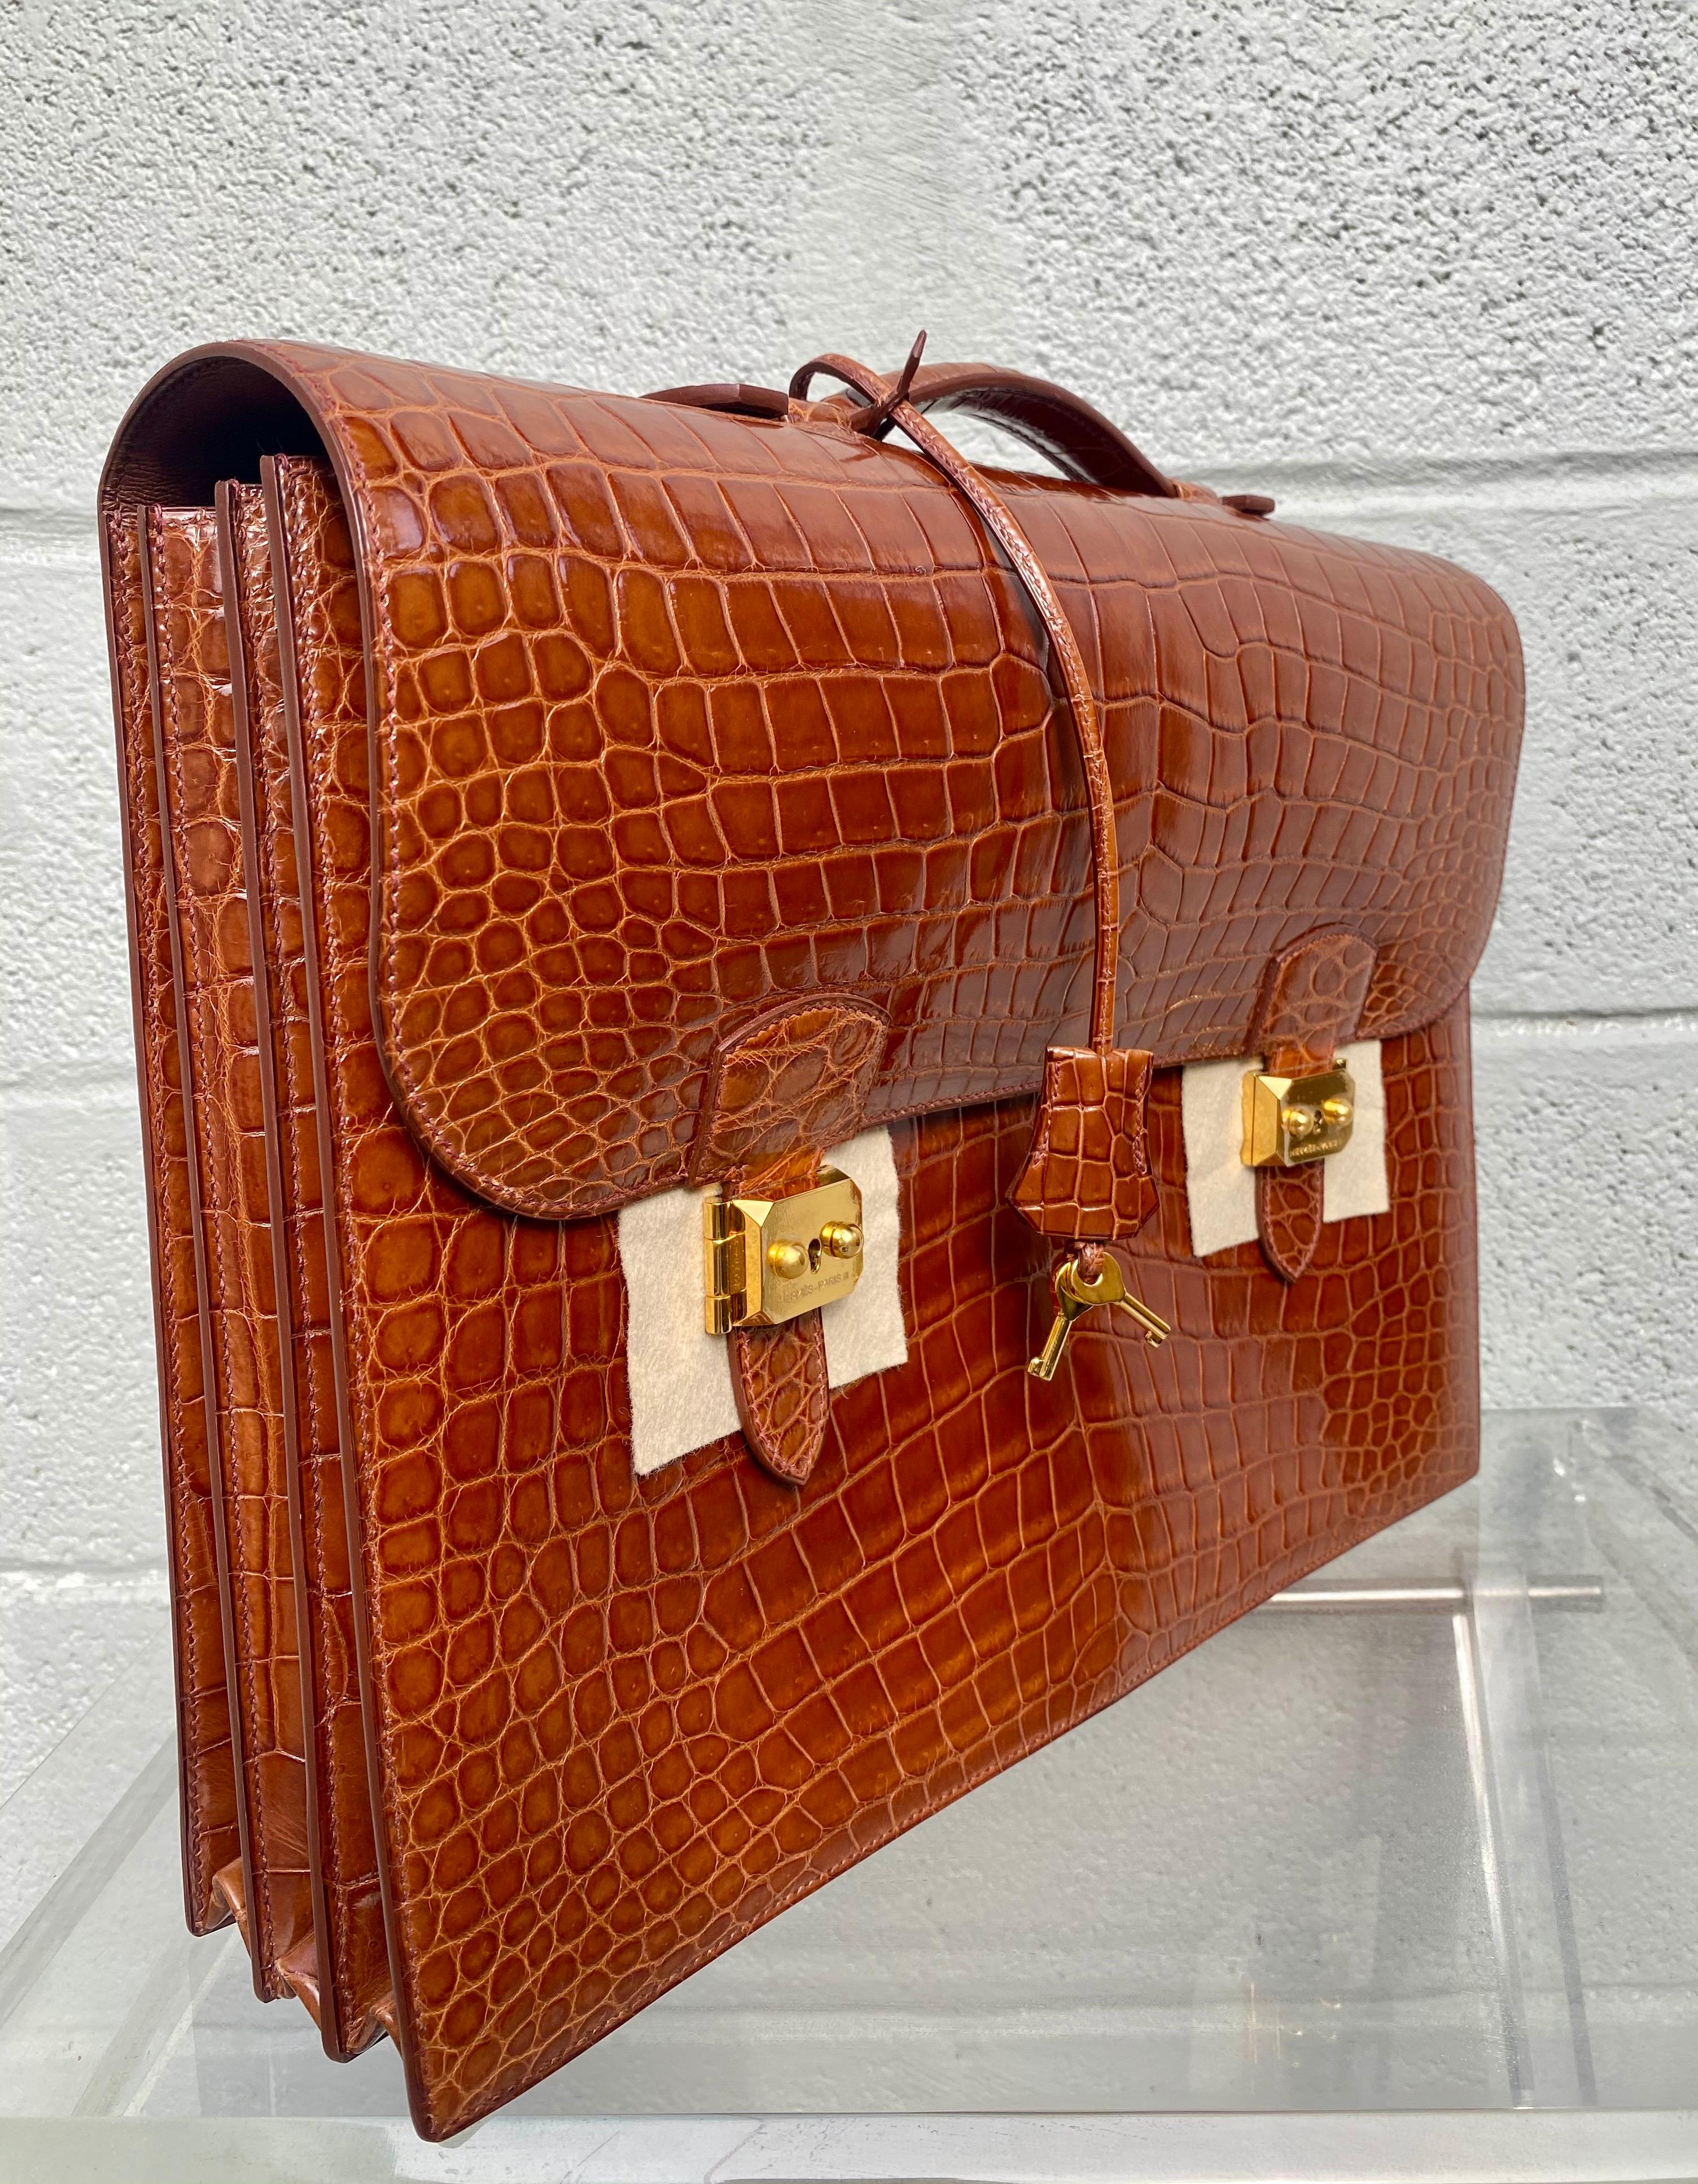 The Sac à Depeche  briefcase from Hermès of Paris is one of the famed French luxury goods house's most coveted and exclusive items. This is a 